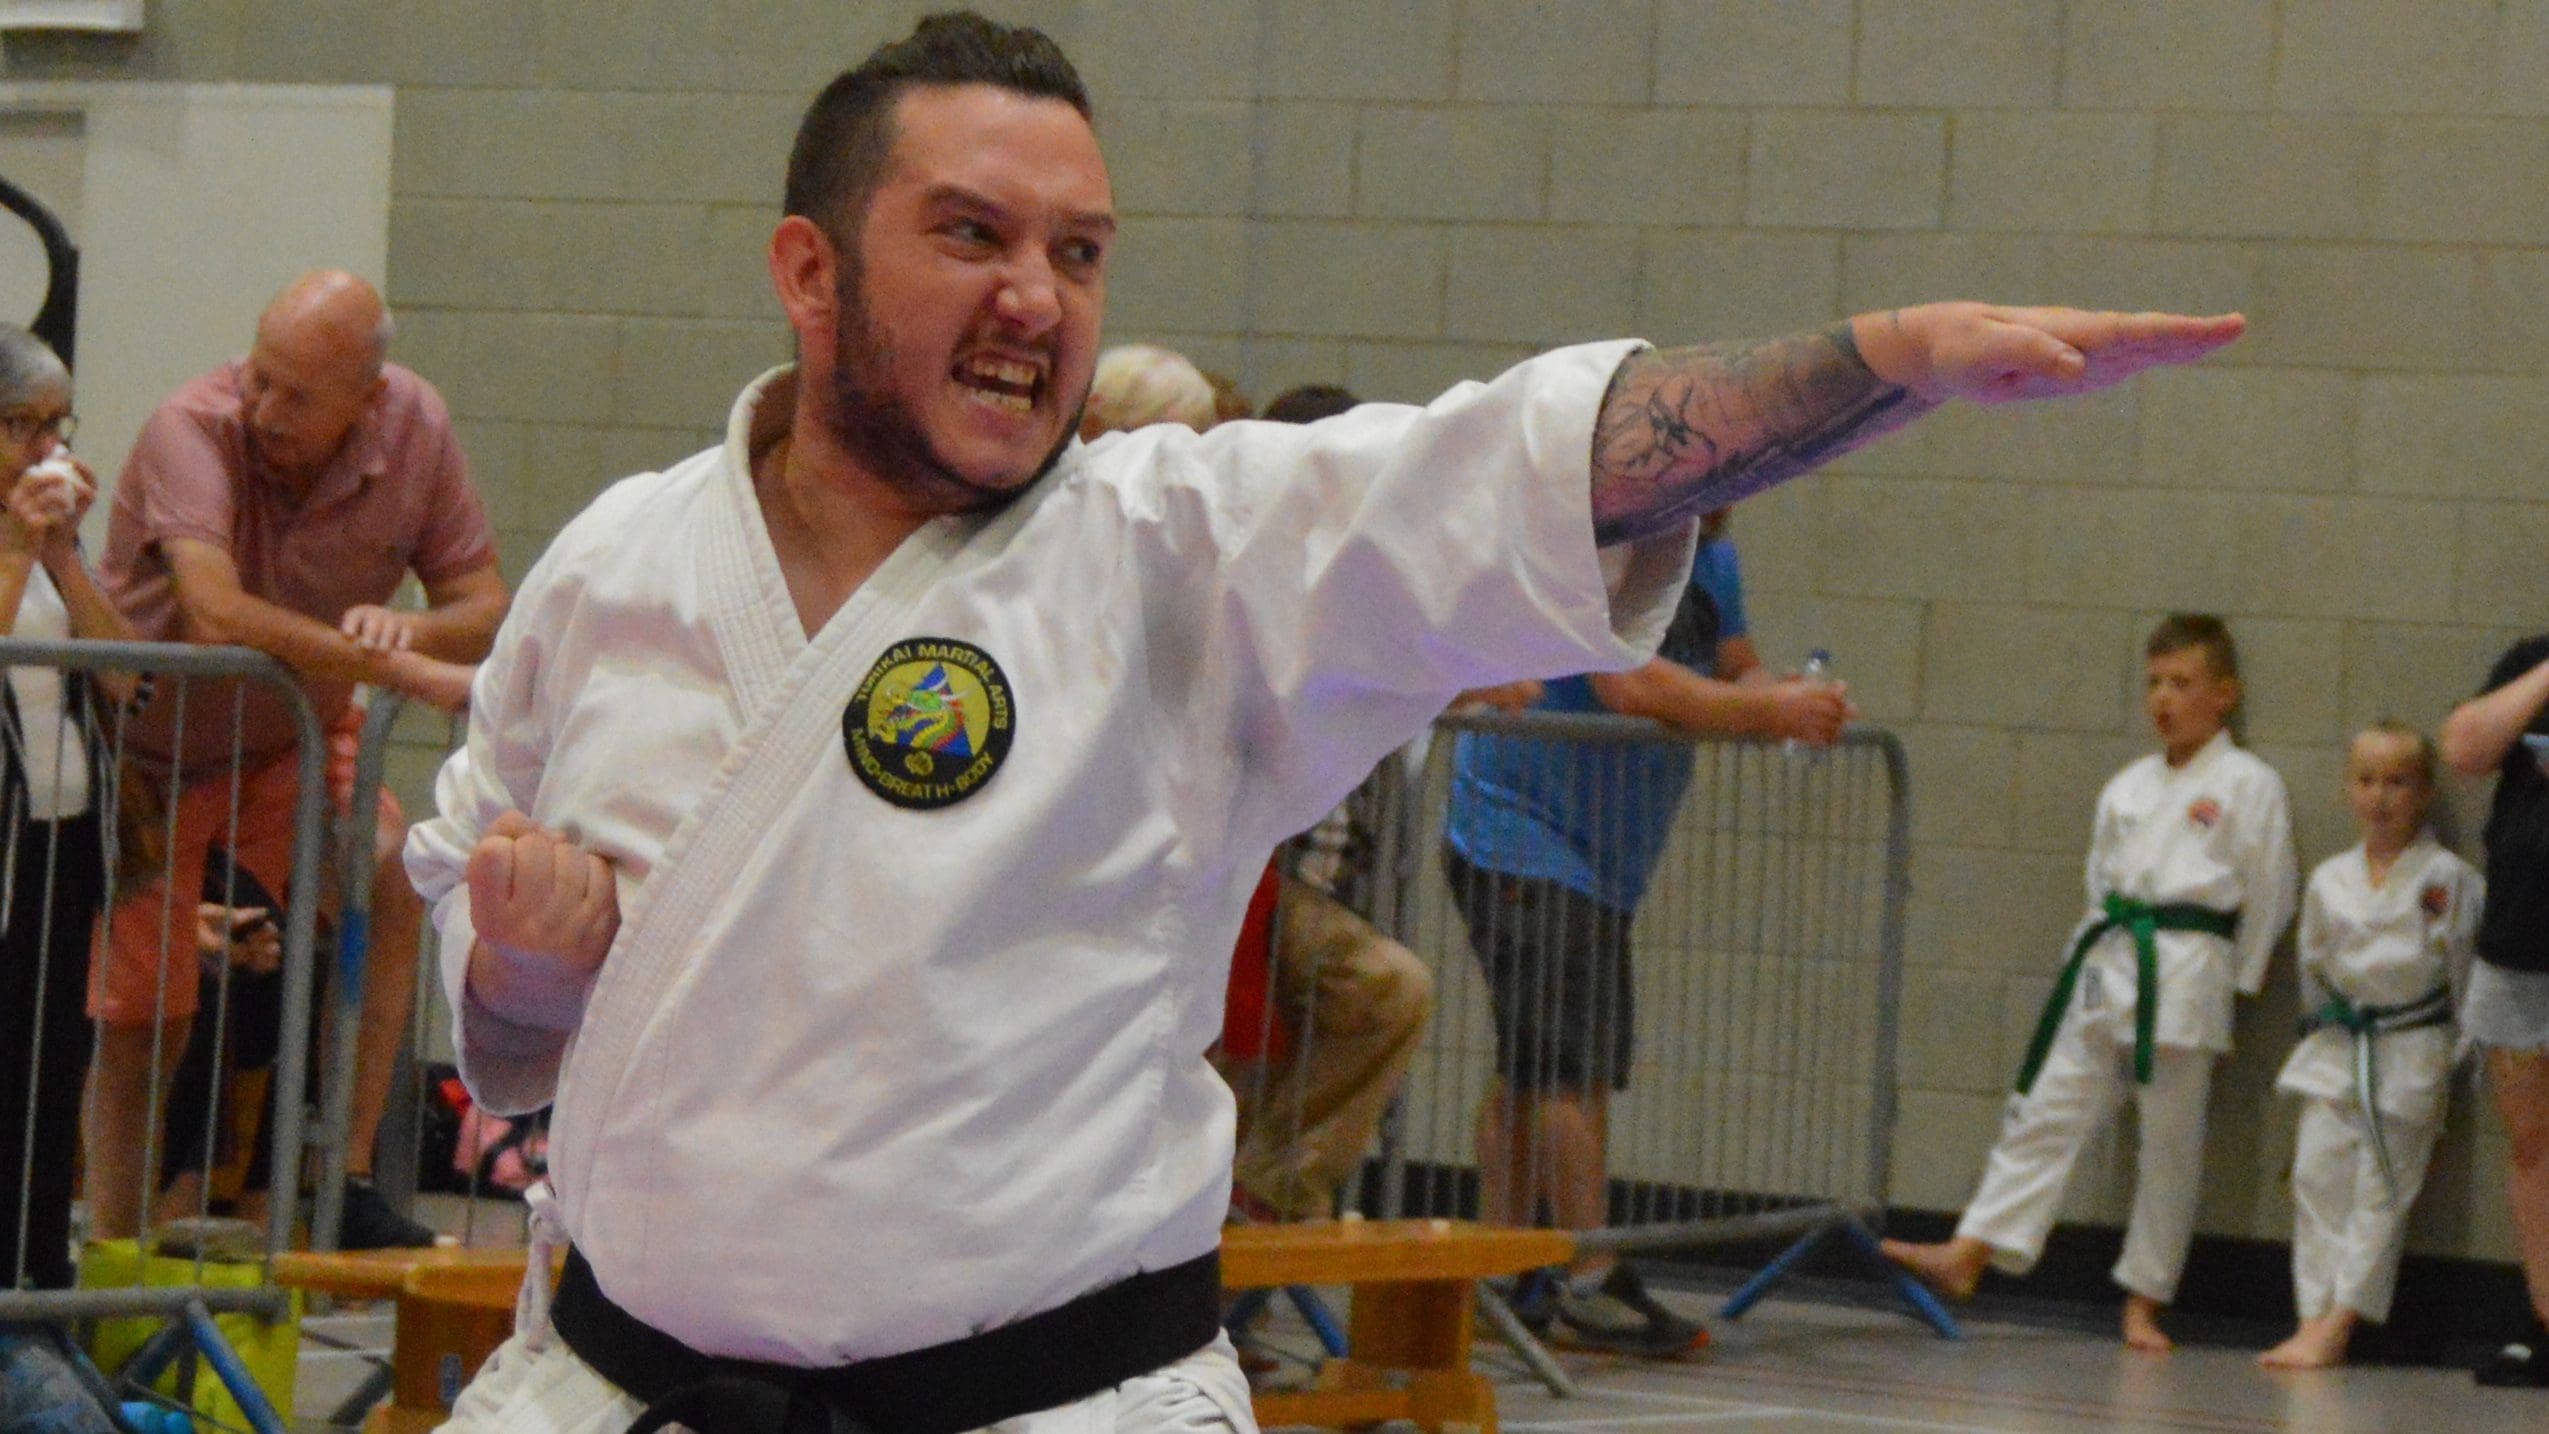 Matt, the Oubaitori Karate Club Head Coach, competing in competition. He has ADHD and Autism. Here you can see him performing Kata.